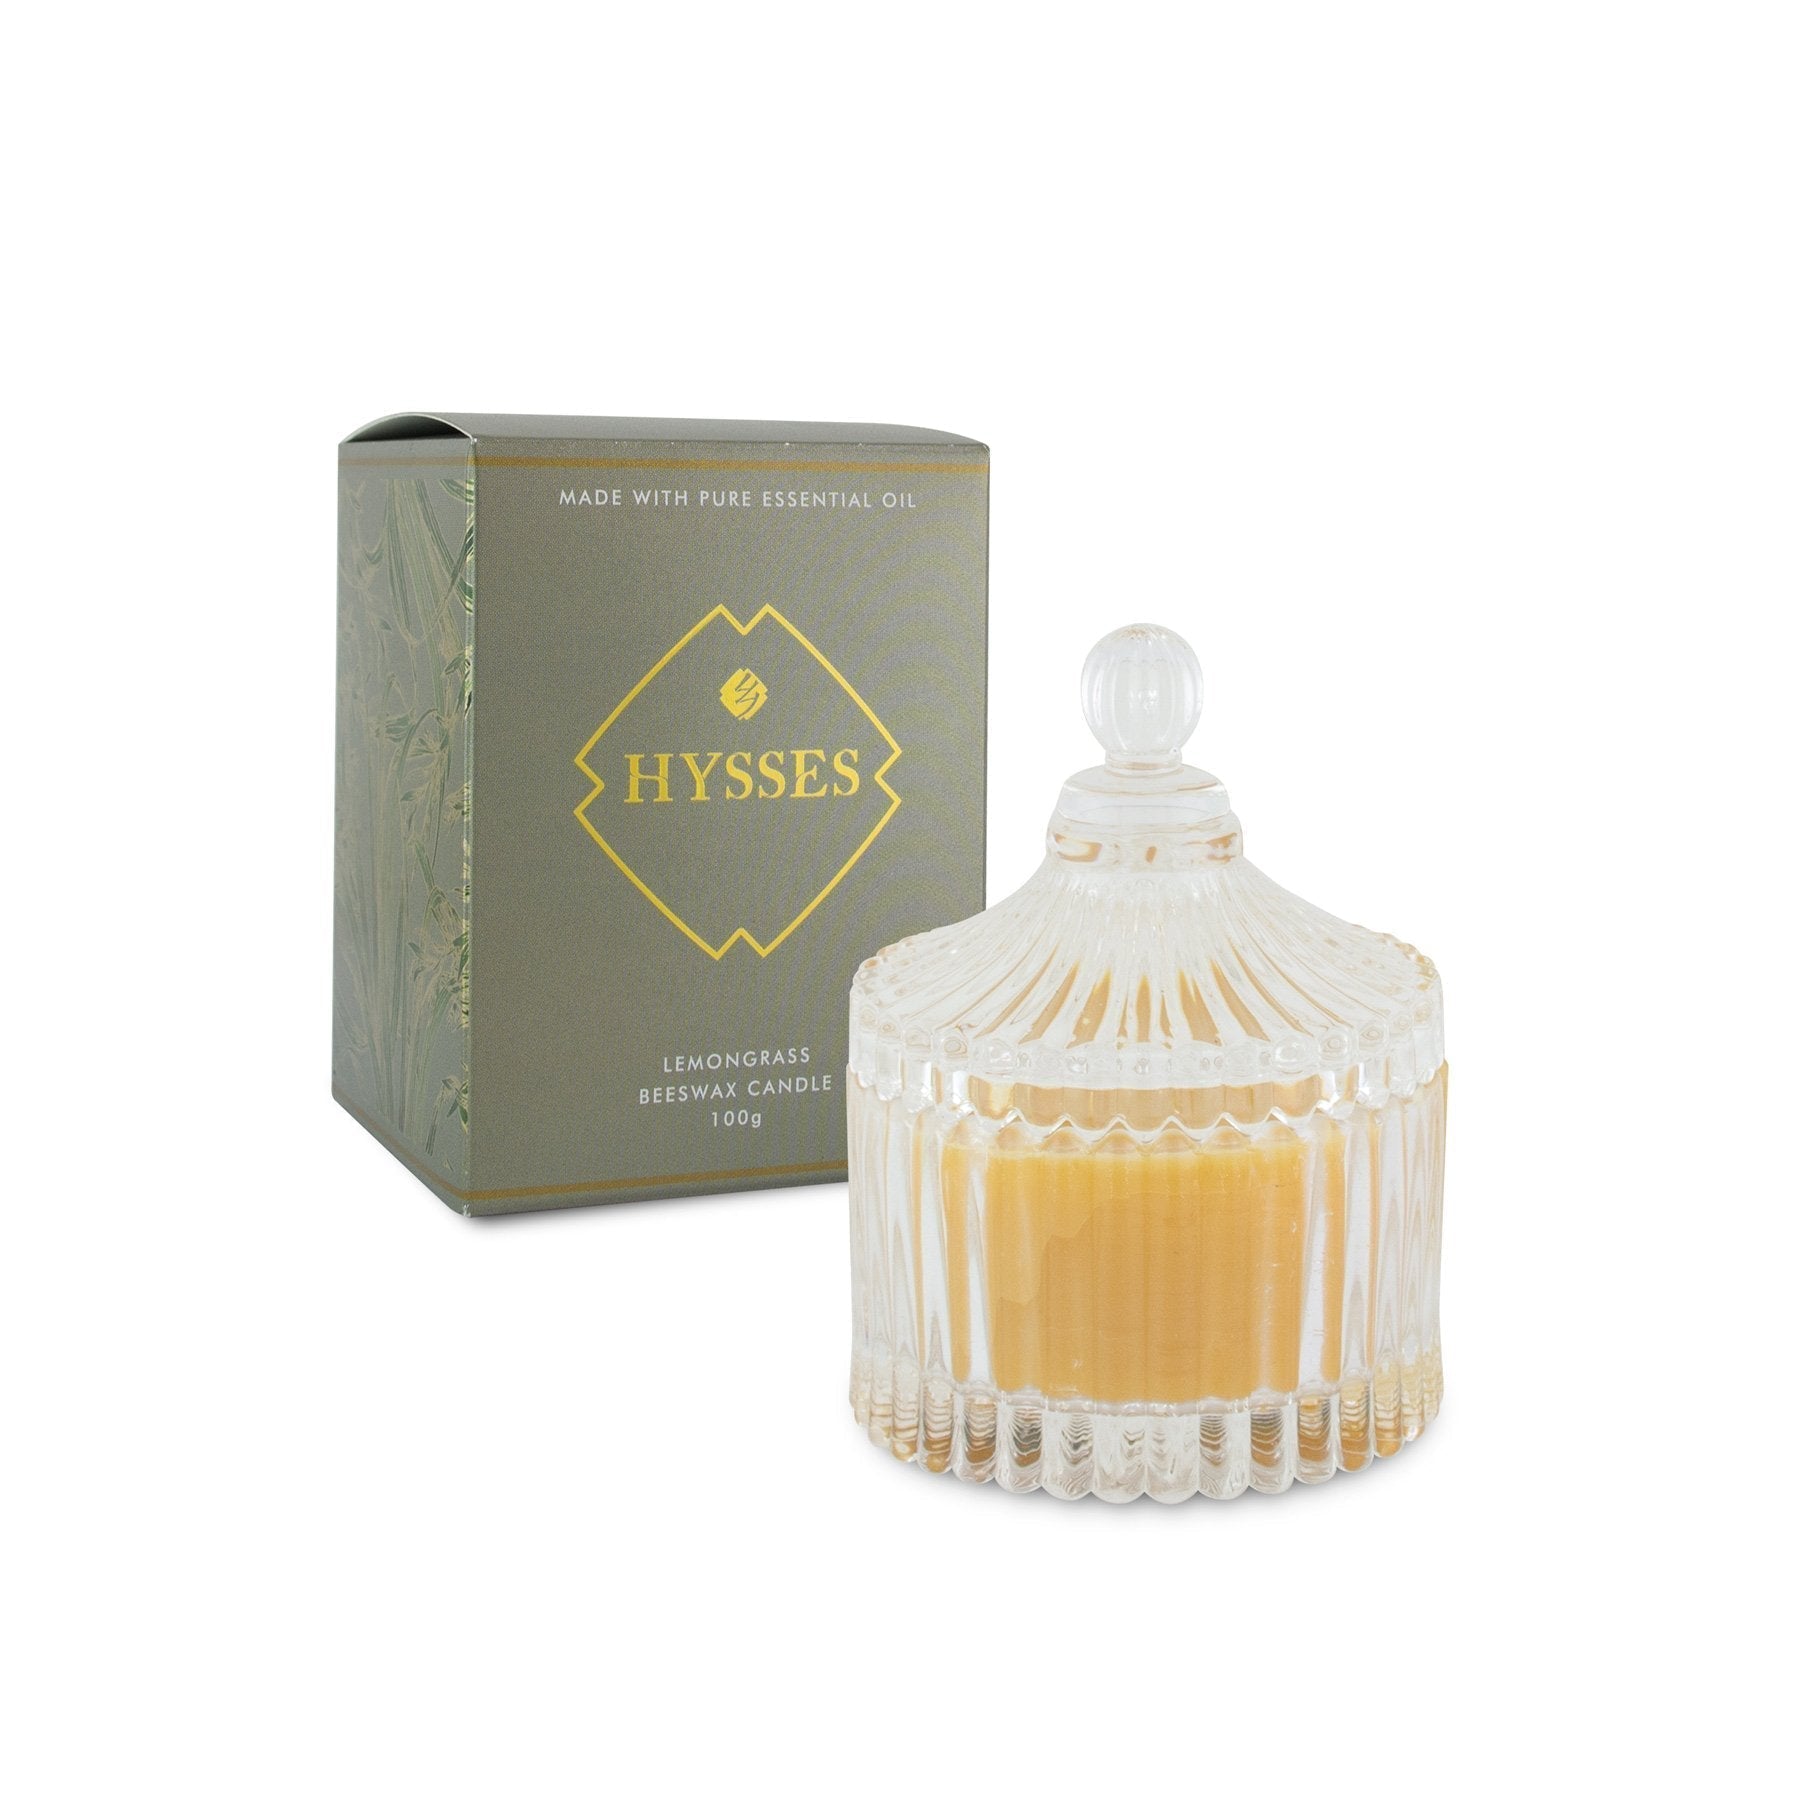 Hysses Home Scents 100g Beeswax Candle Lemongrass 100g